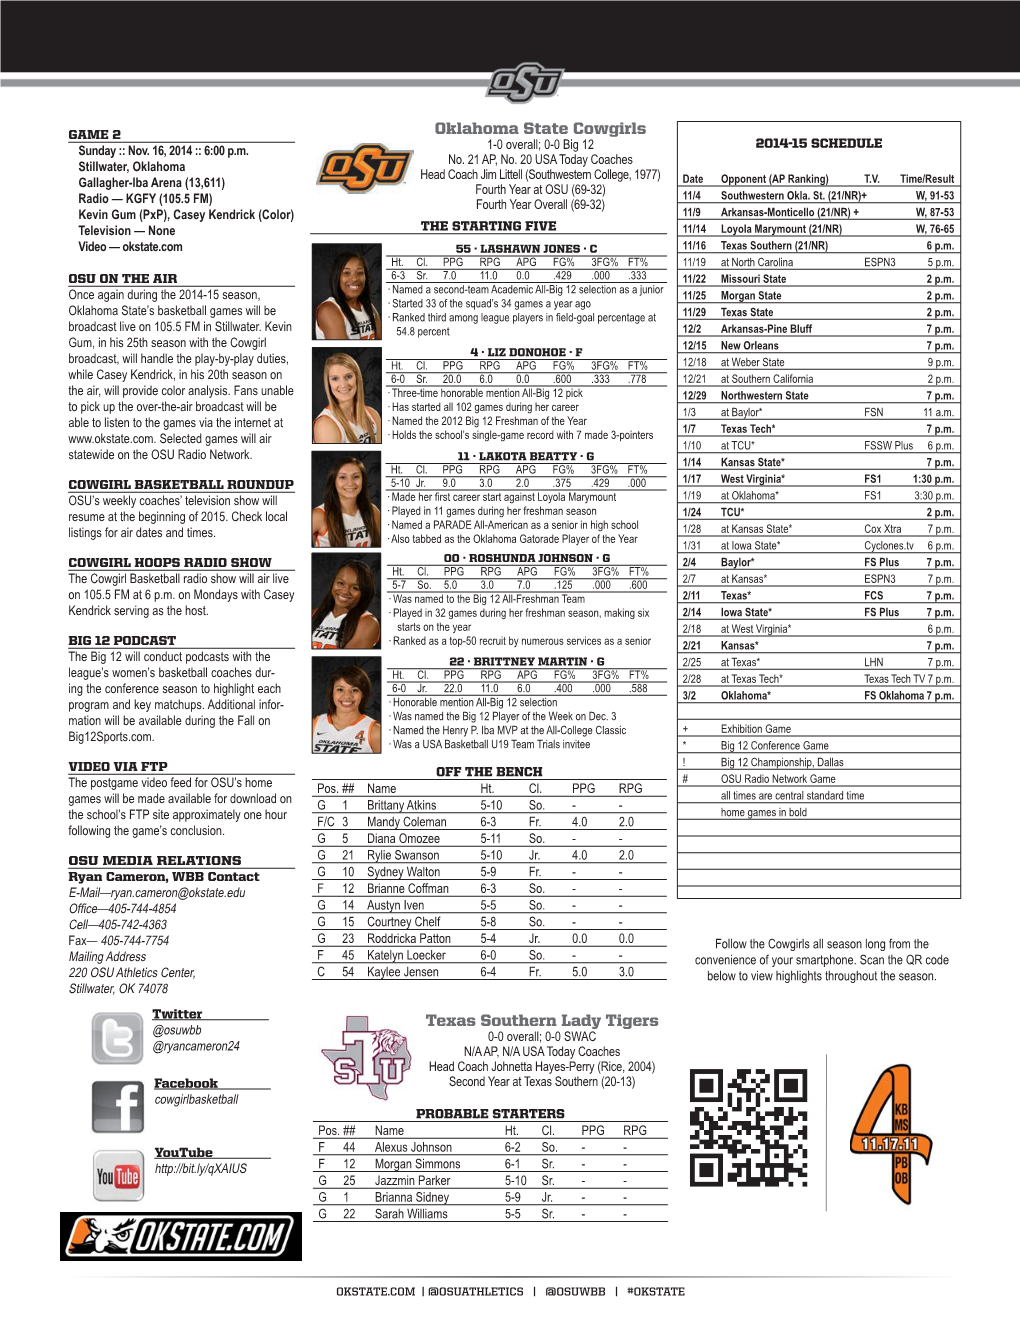 Oklahoma State Cowgirls Texas Southern Lady Tigers